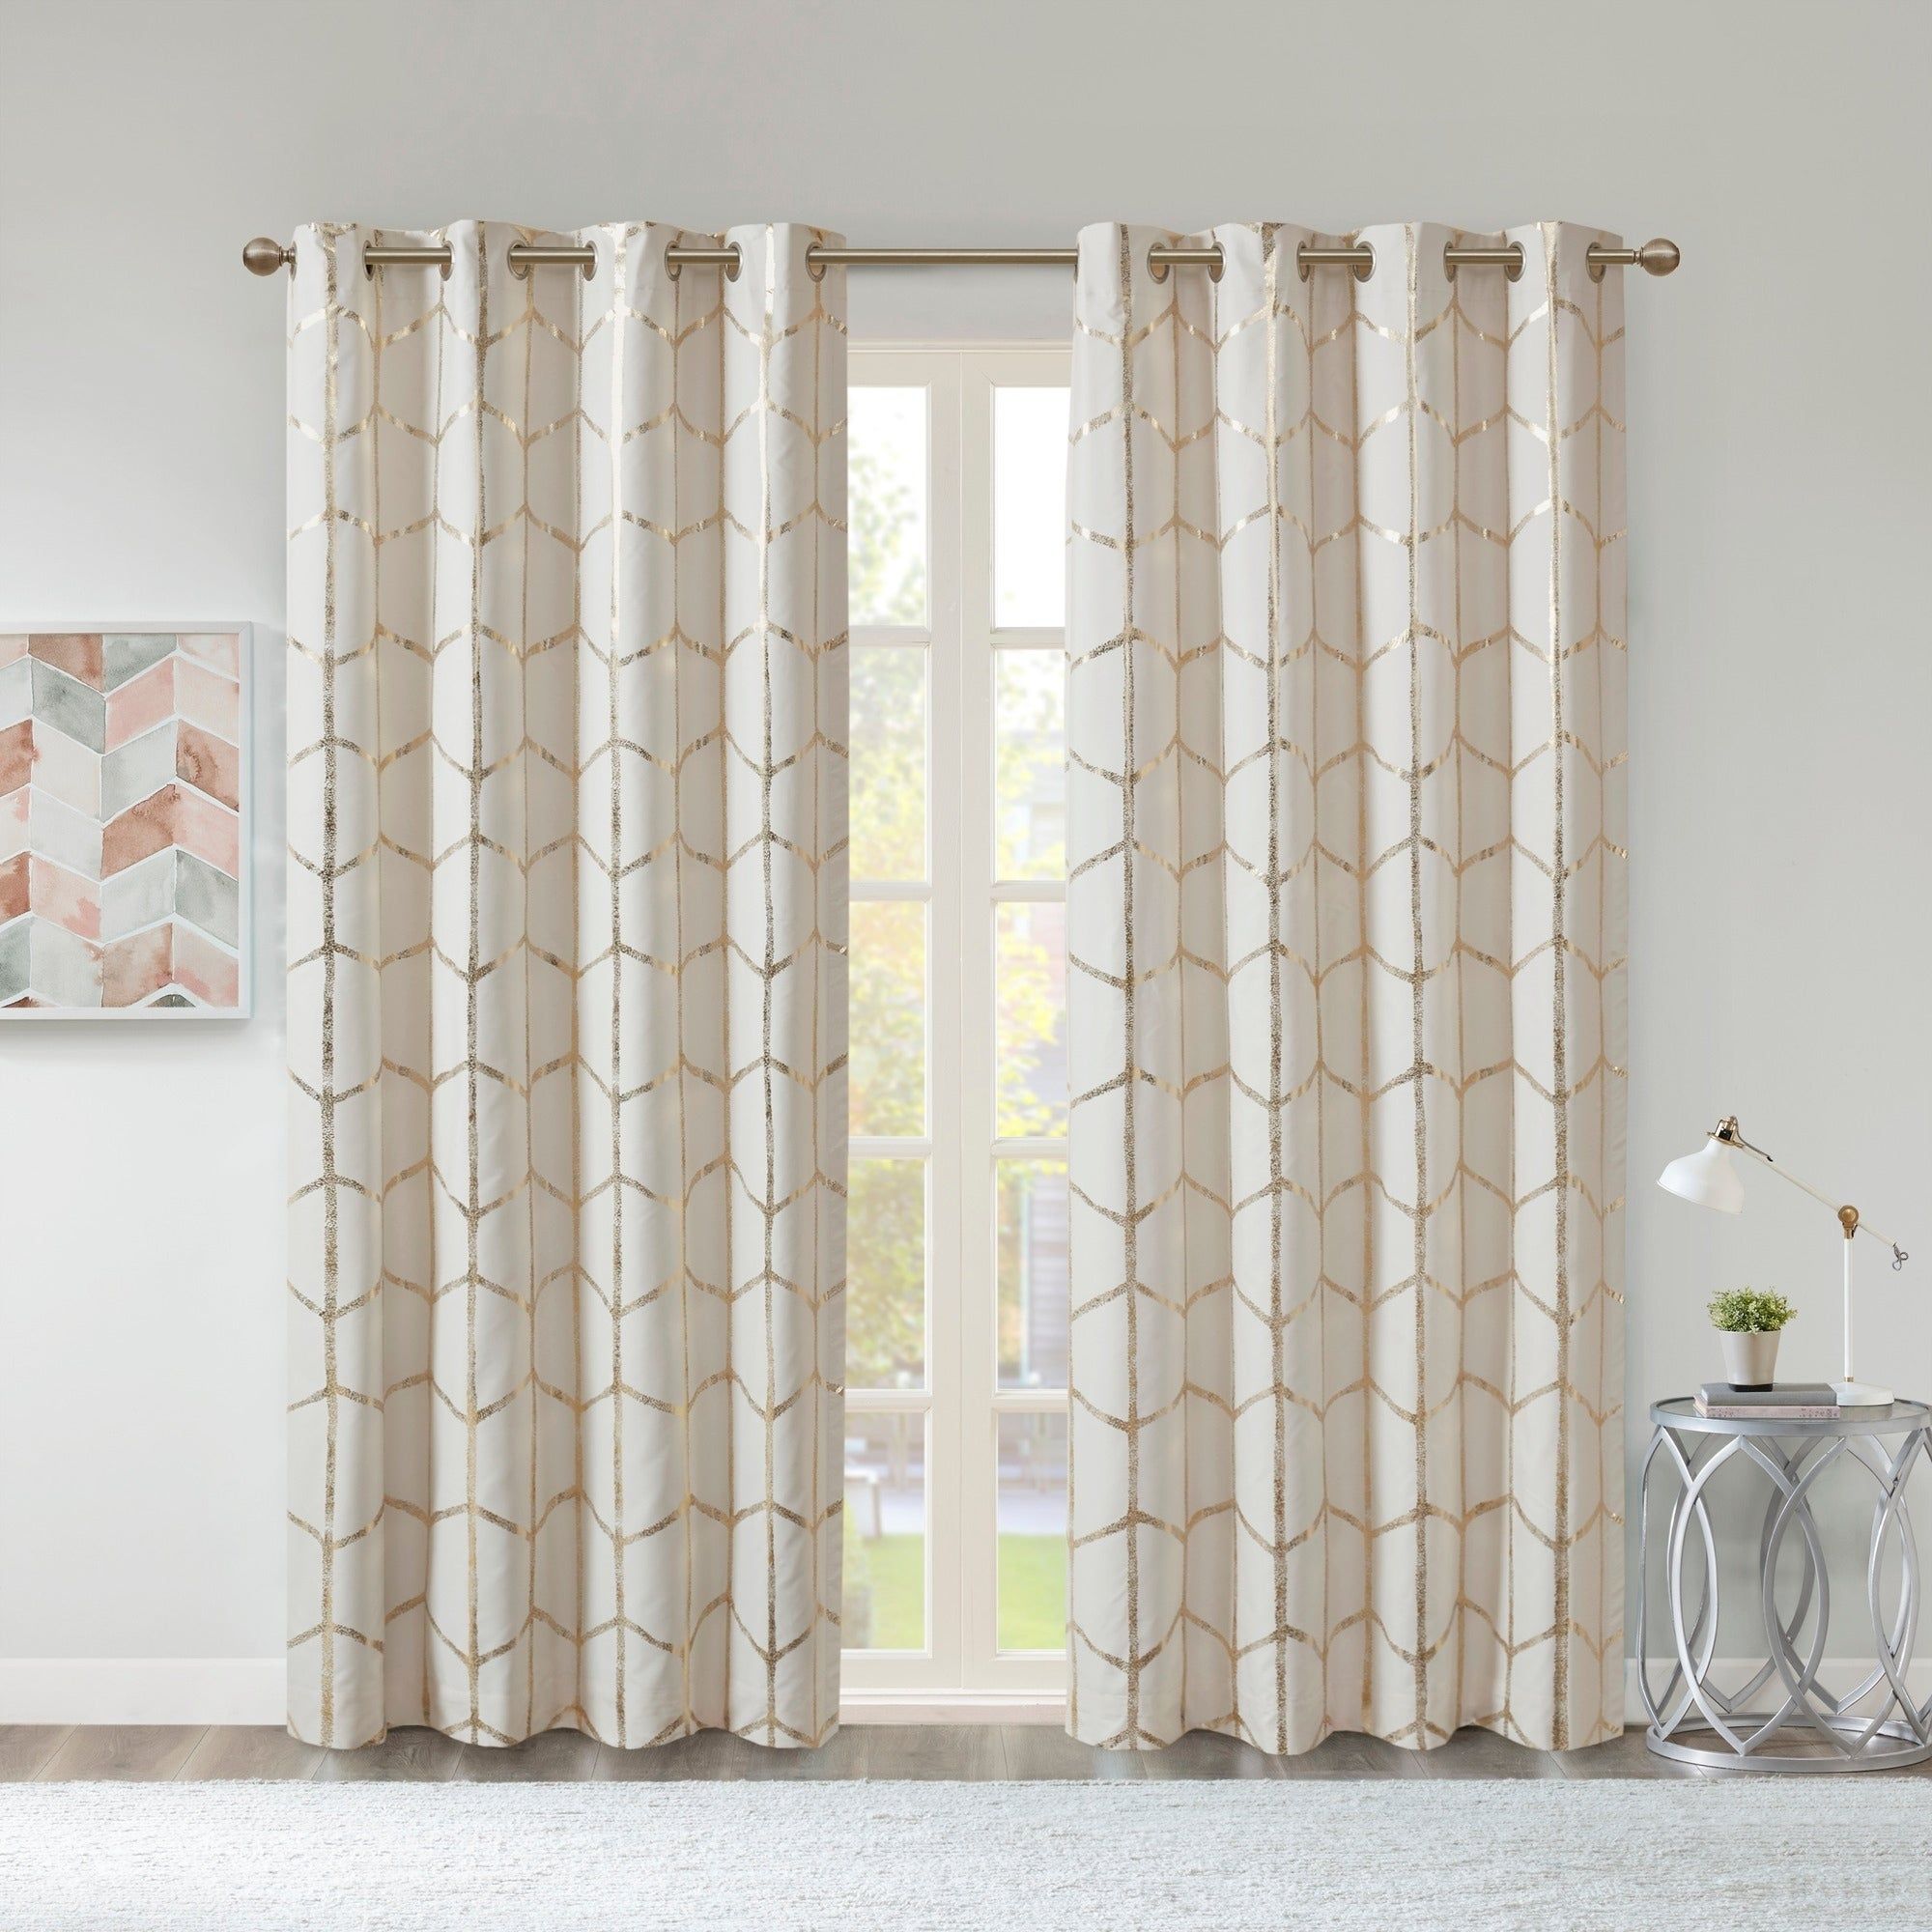 Intelligent Design Khloe Total Blackout Metallic Print Grommet Top Curtain  Panel Within Total Blackout Metallic Print Grommet Top Curtain Panels (Photo 1 of 36)